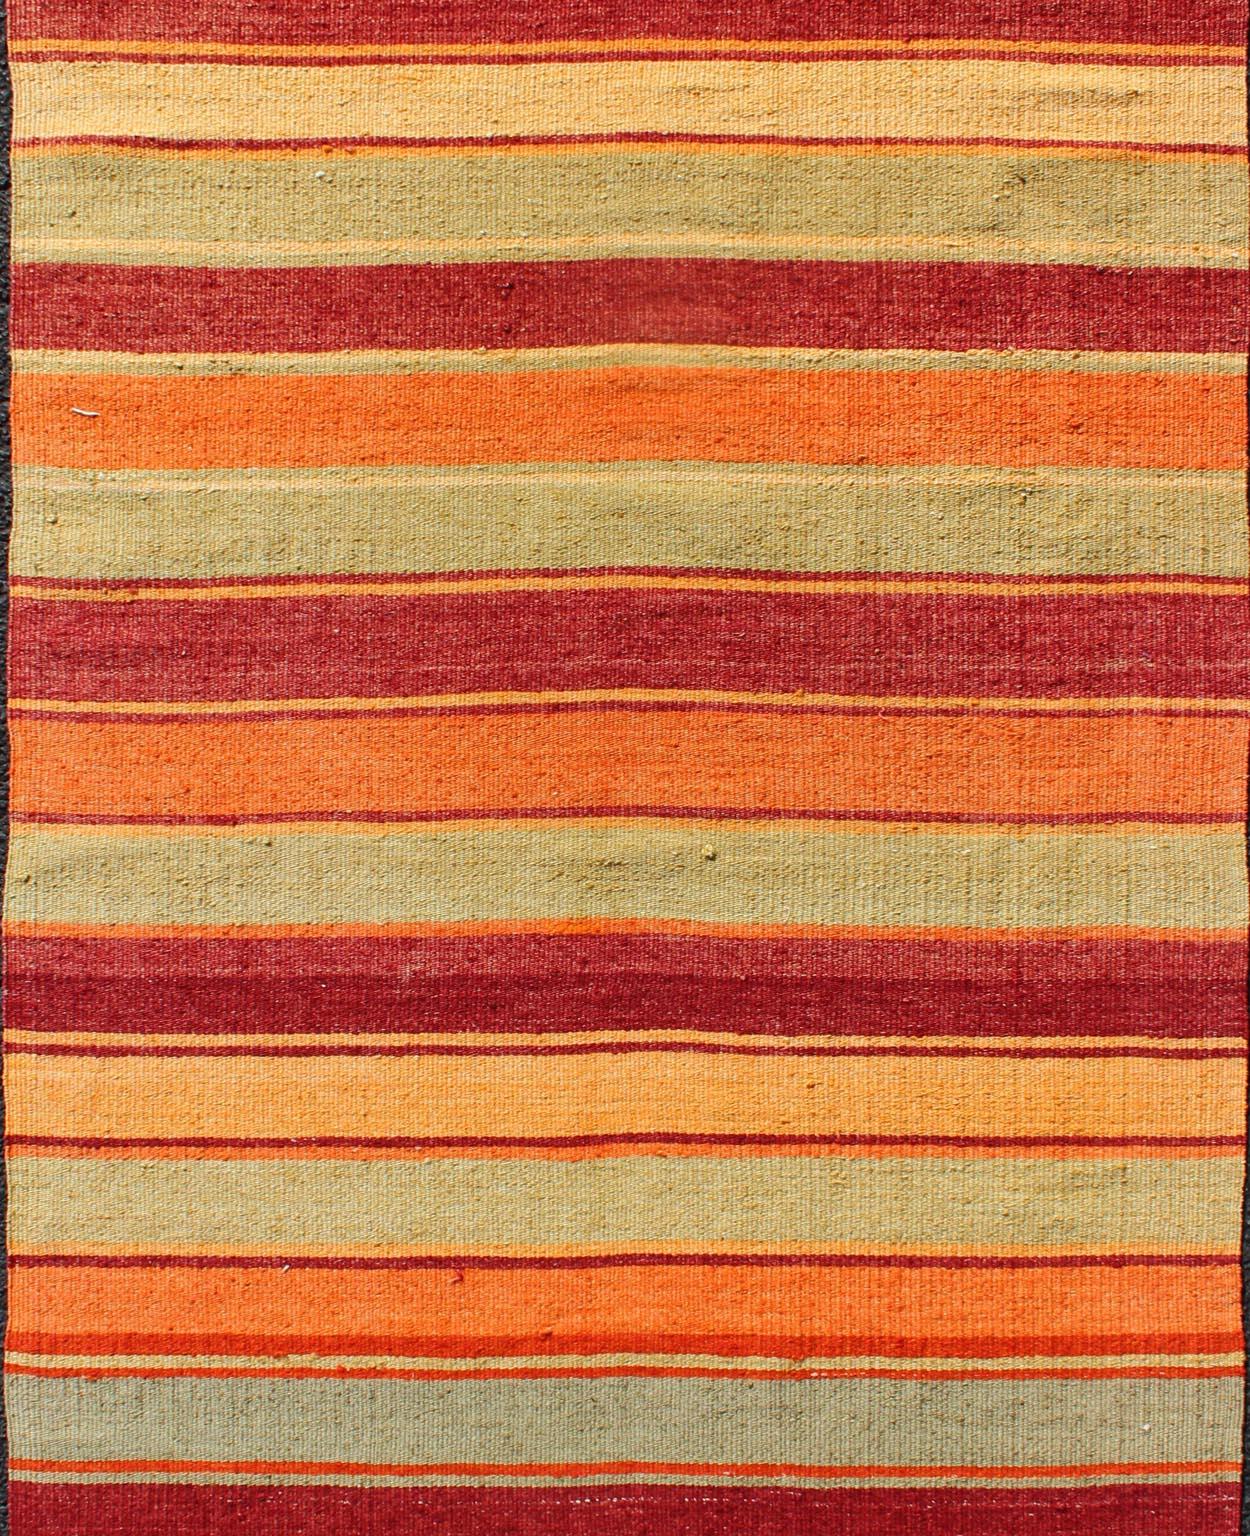 Bright & Colorful Vintage Turkish Kilim in Red, Green, Yellow, and Orange In Good Condition For Sale In Atlanta, GA